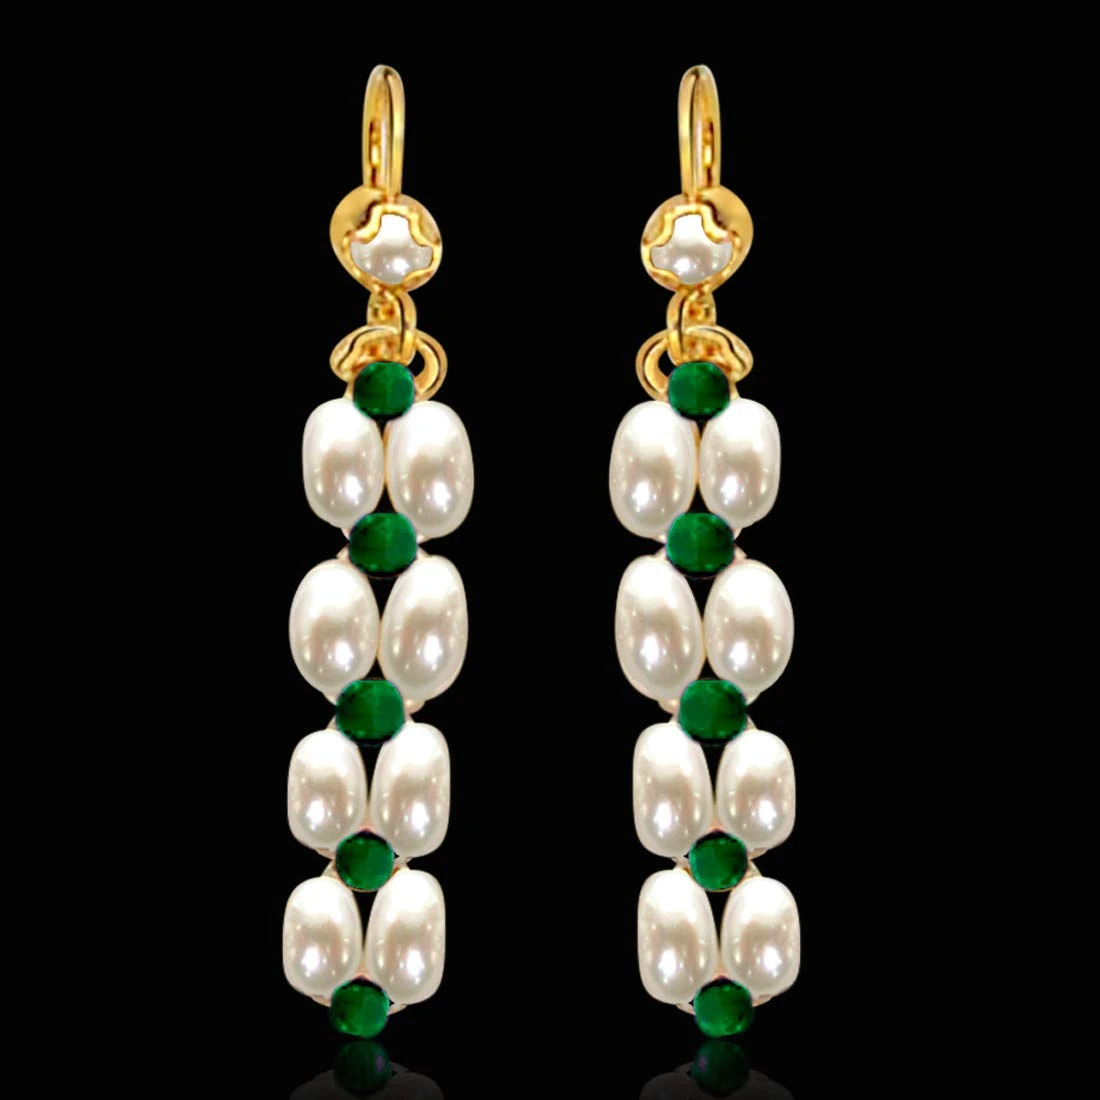 Real Rice Pearl & Green Onyx Beads Hanging Earrings for Women (SE34)